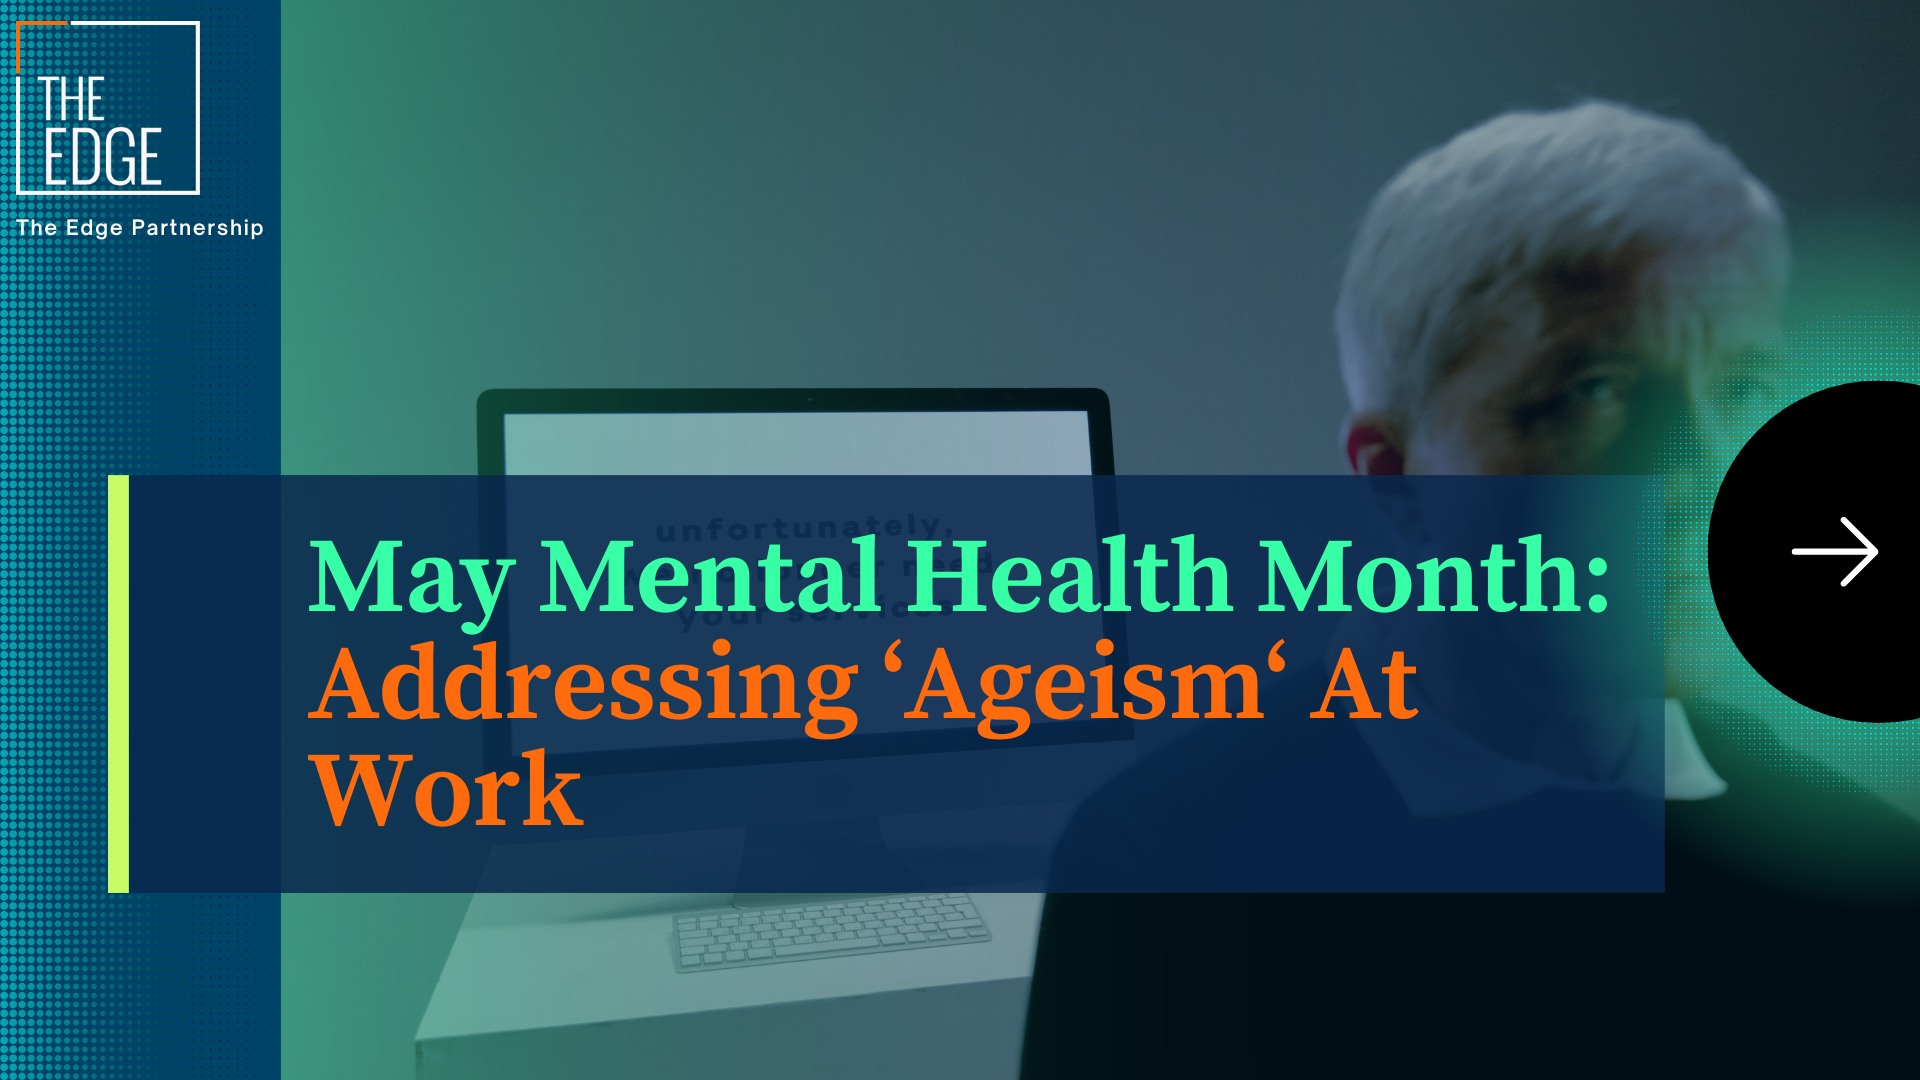 It is May Mental Health Month: Addressing ‘Ageism’ at Work